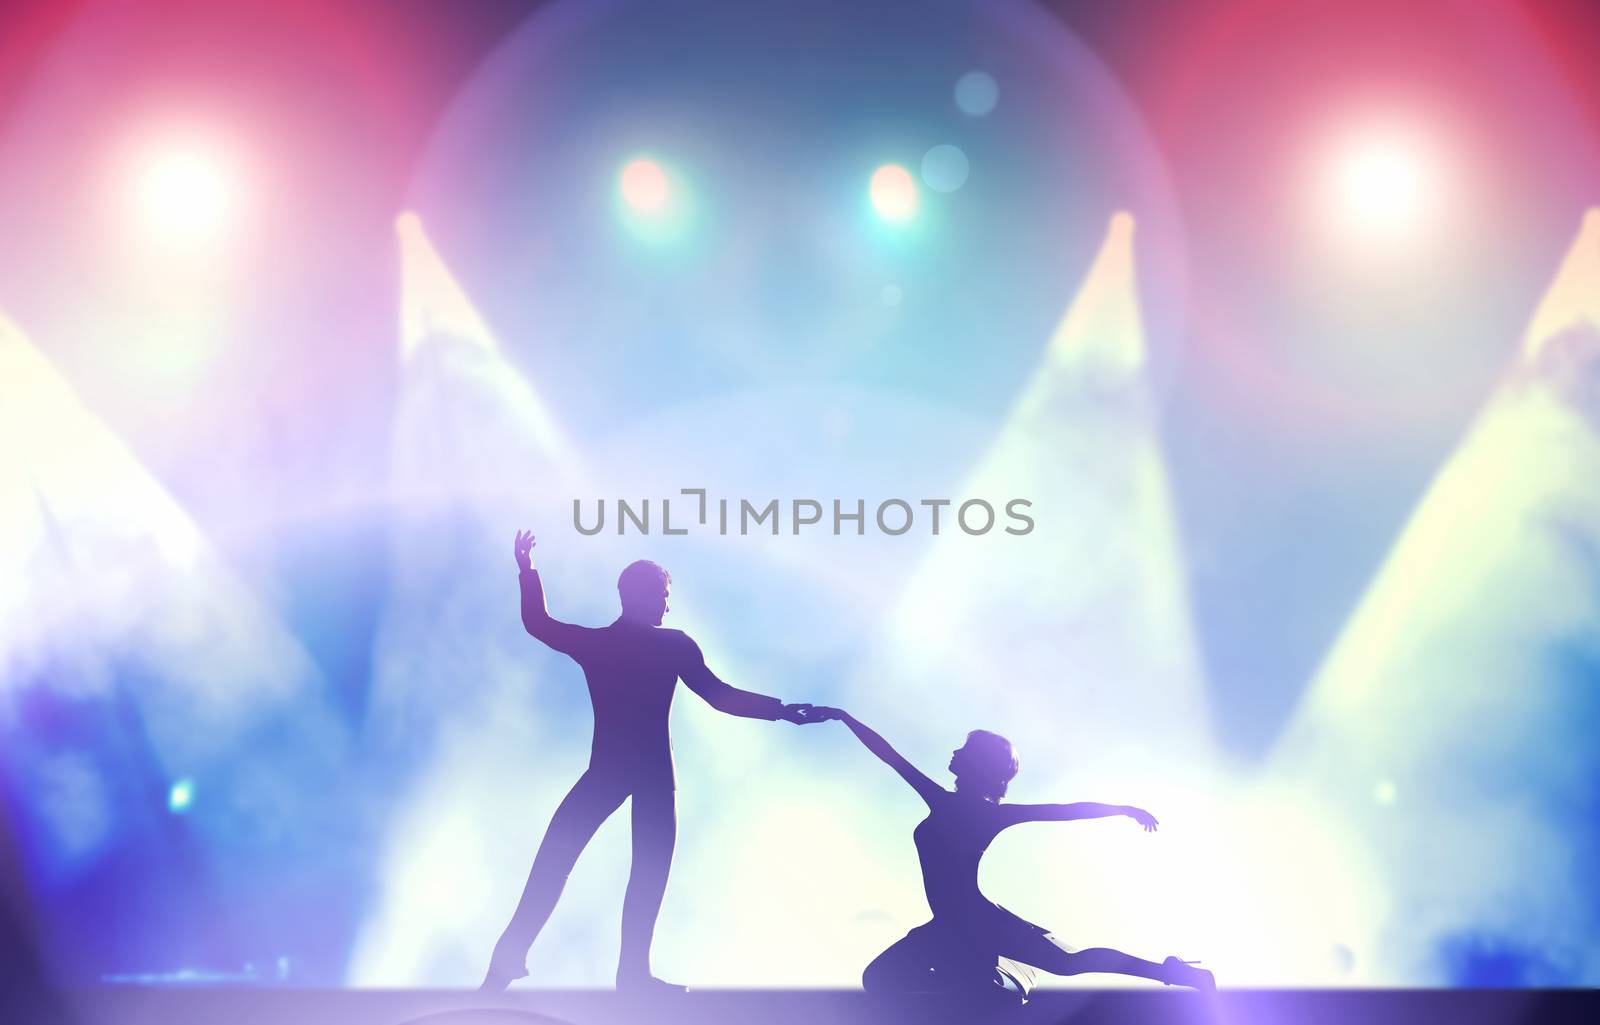 A couple of dancers in elegant, passionate dancing pose in club lights. Party, nightlife